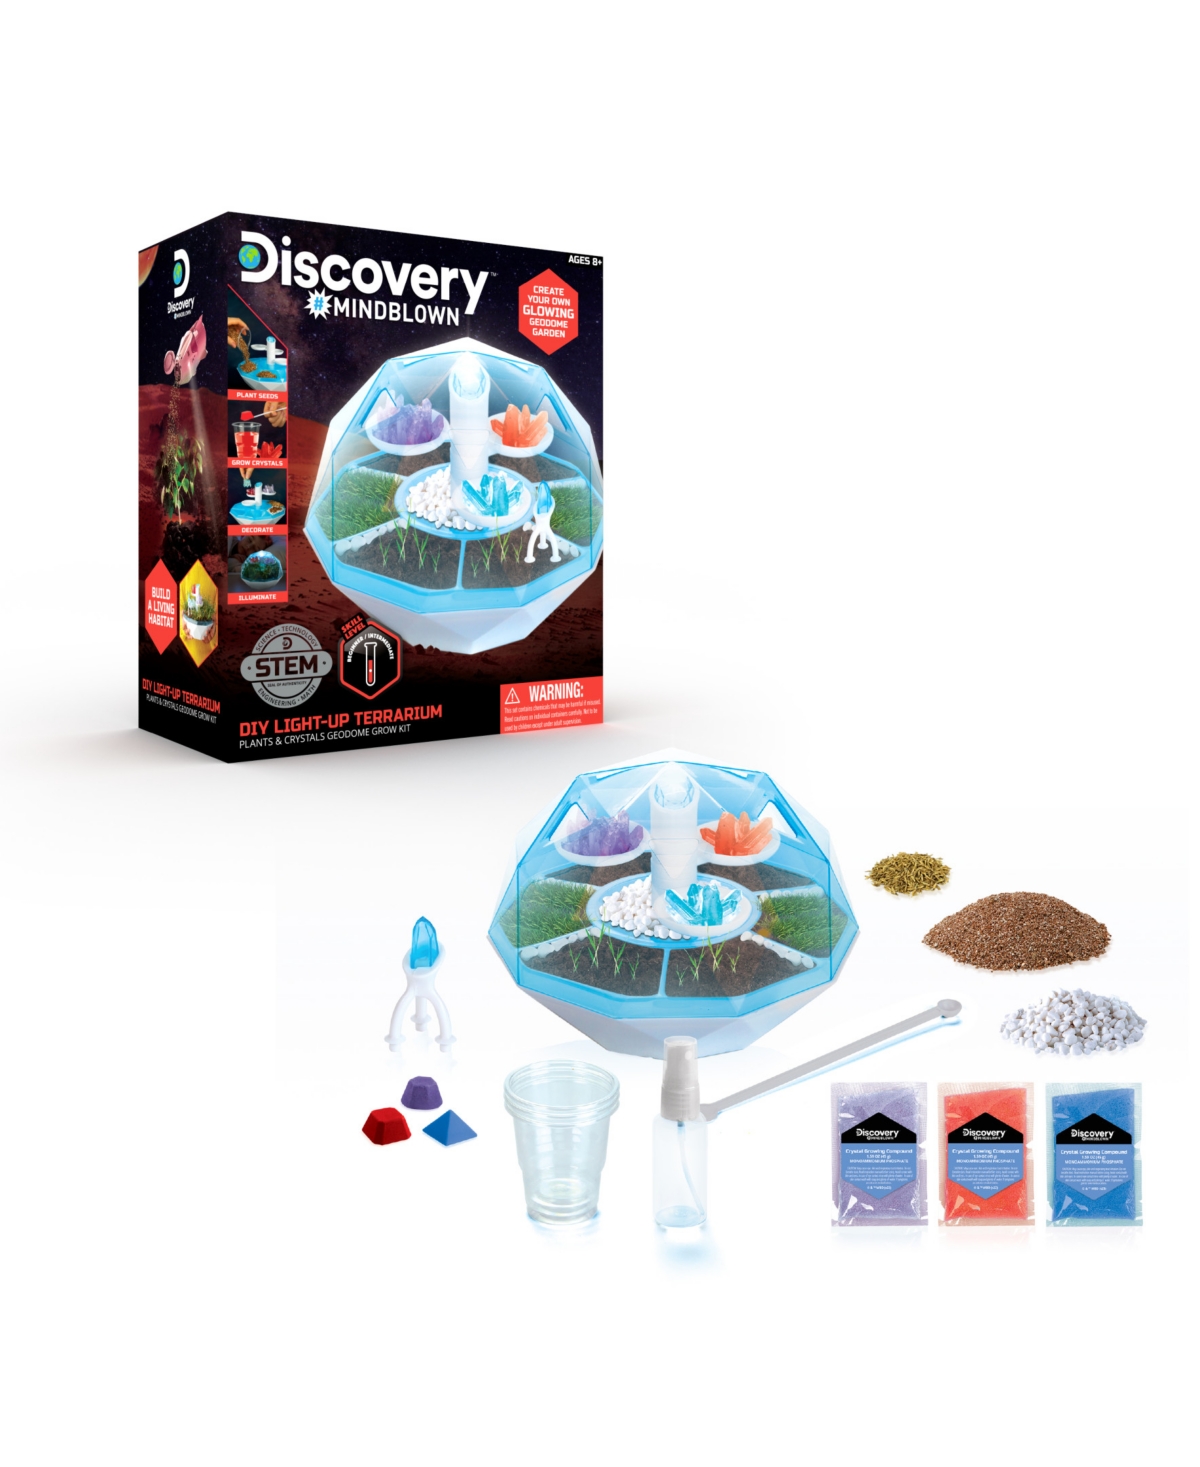 Discovery Mindblown Light-up Terrarium Plants And Crystals Grow Kit In White